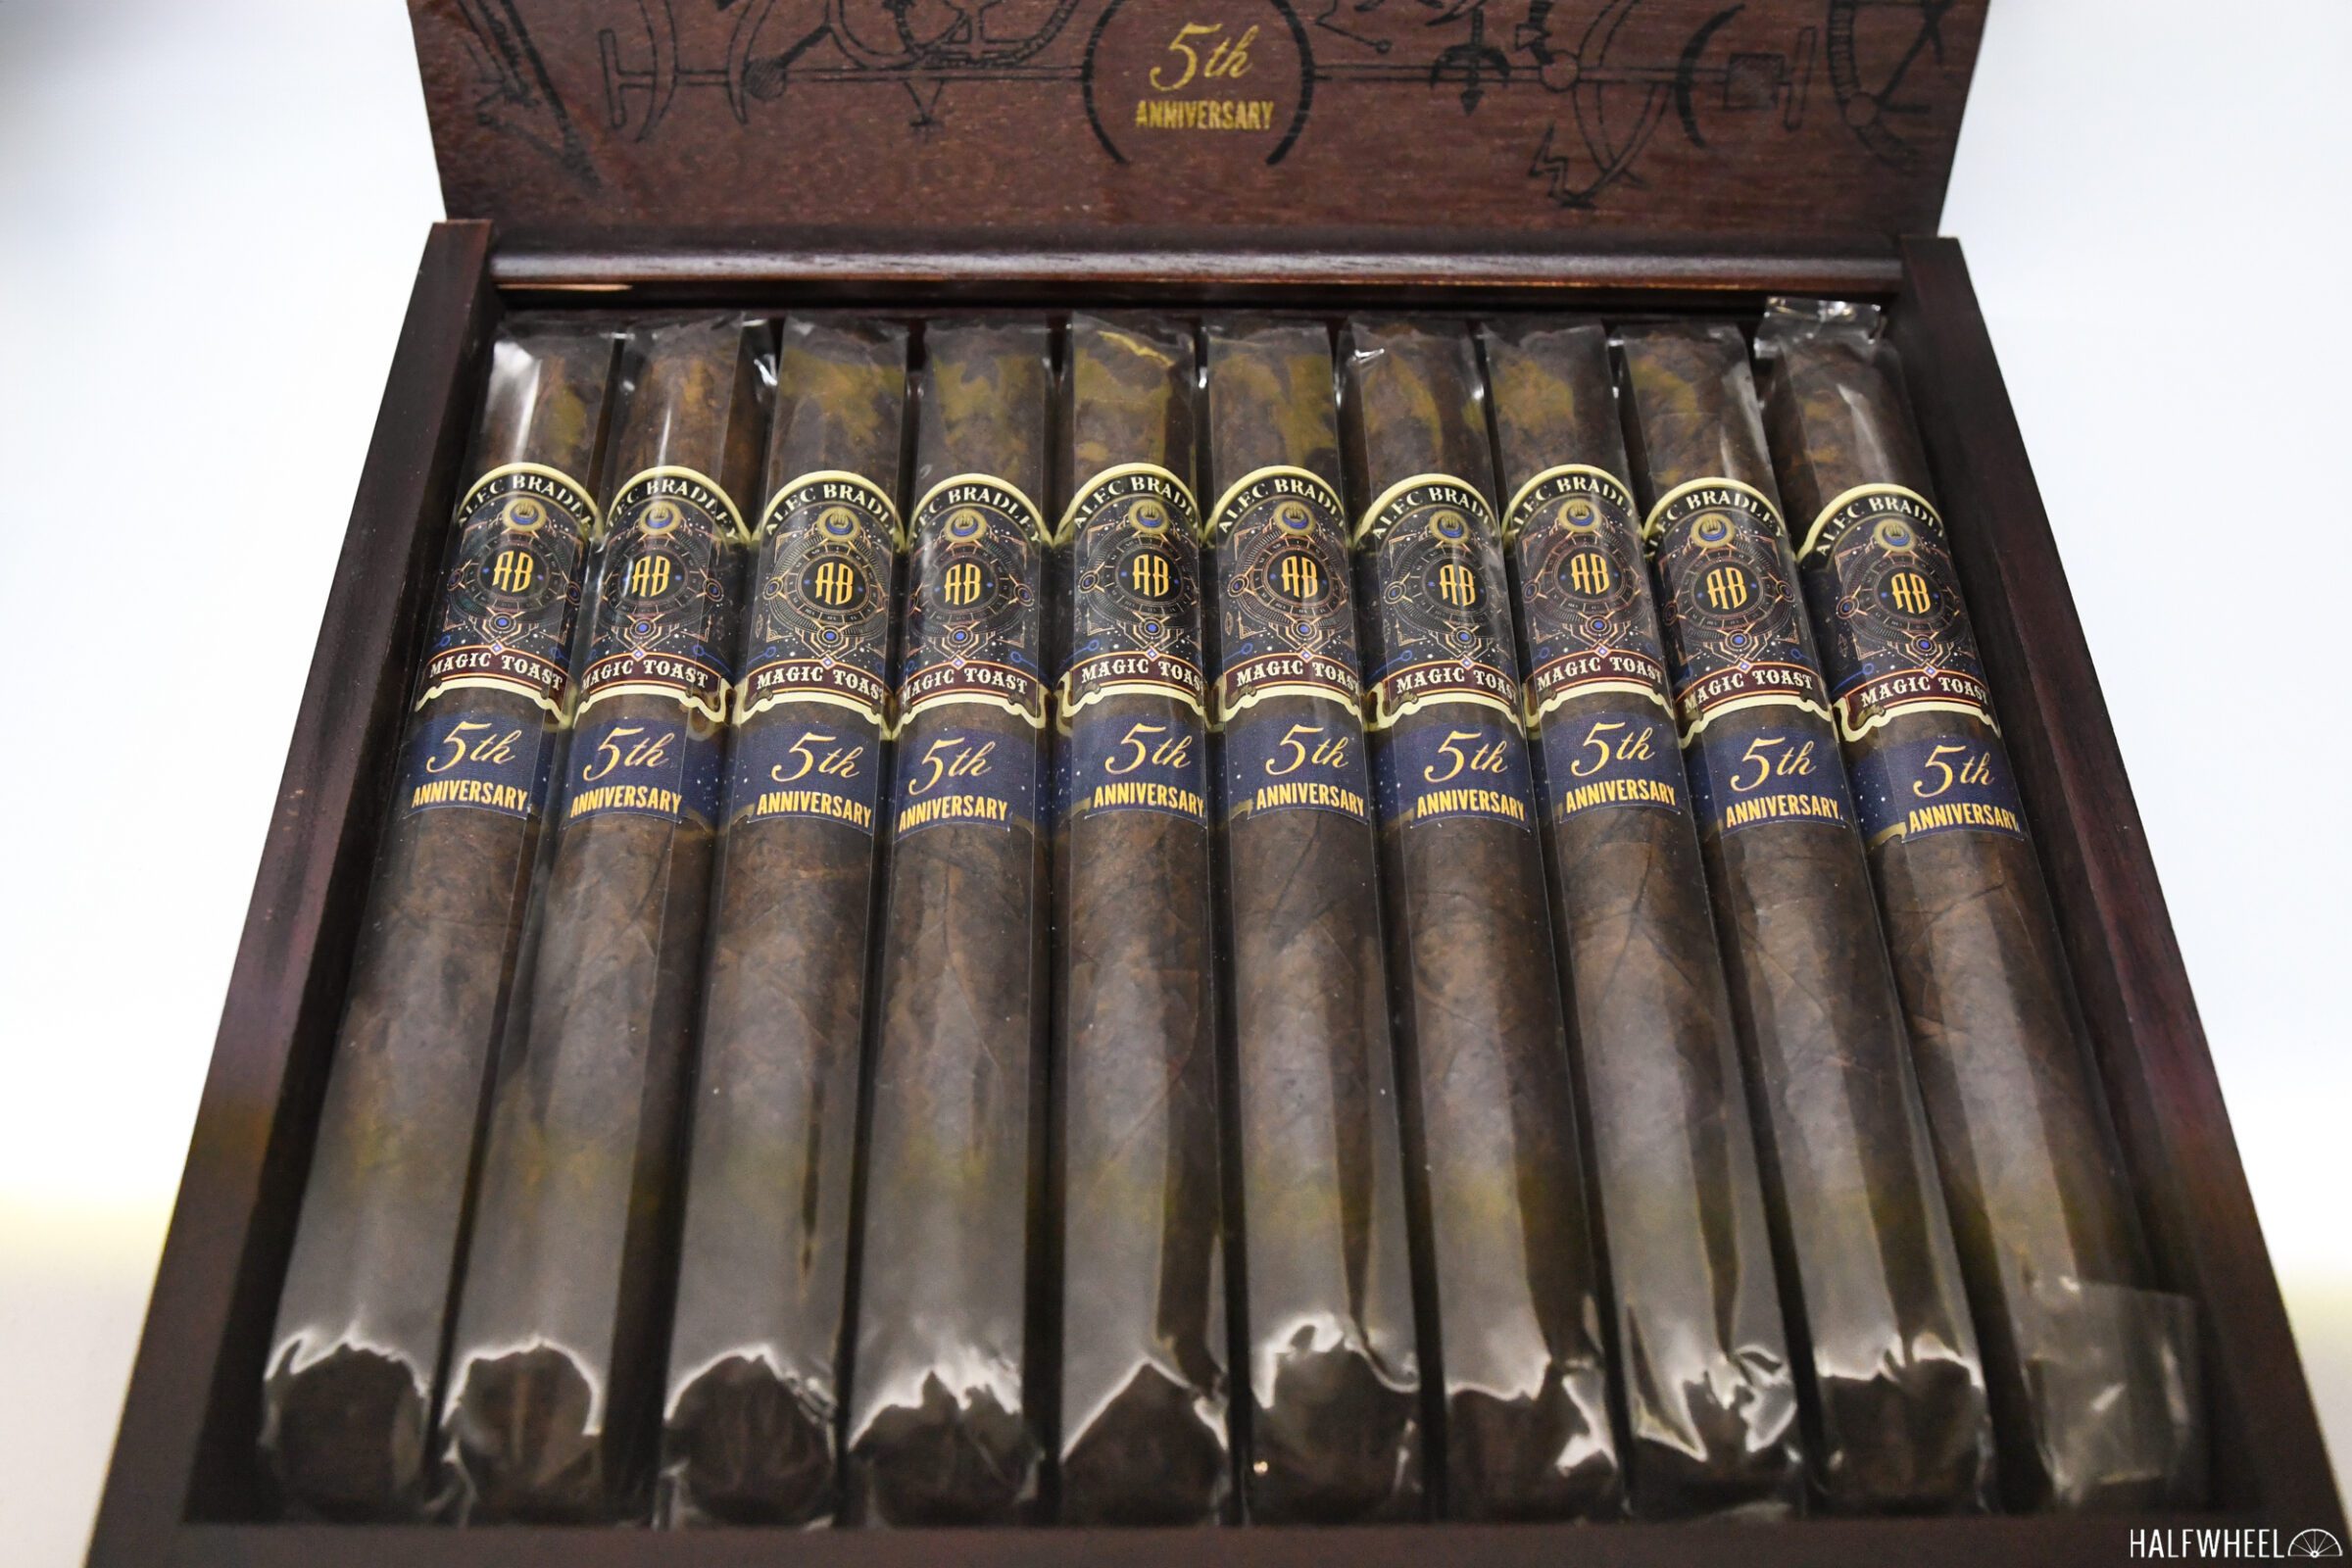 alec-bradley’s-magic-toast-fifth-anniversary-heads-to-stores